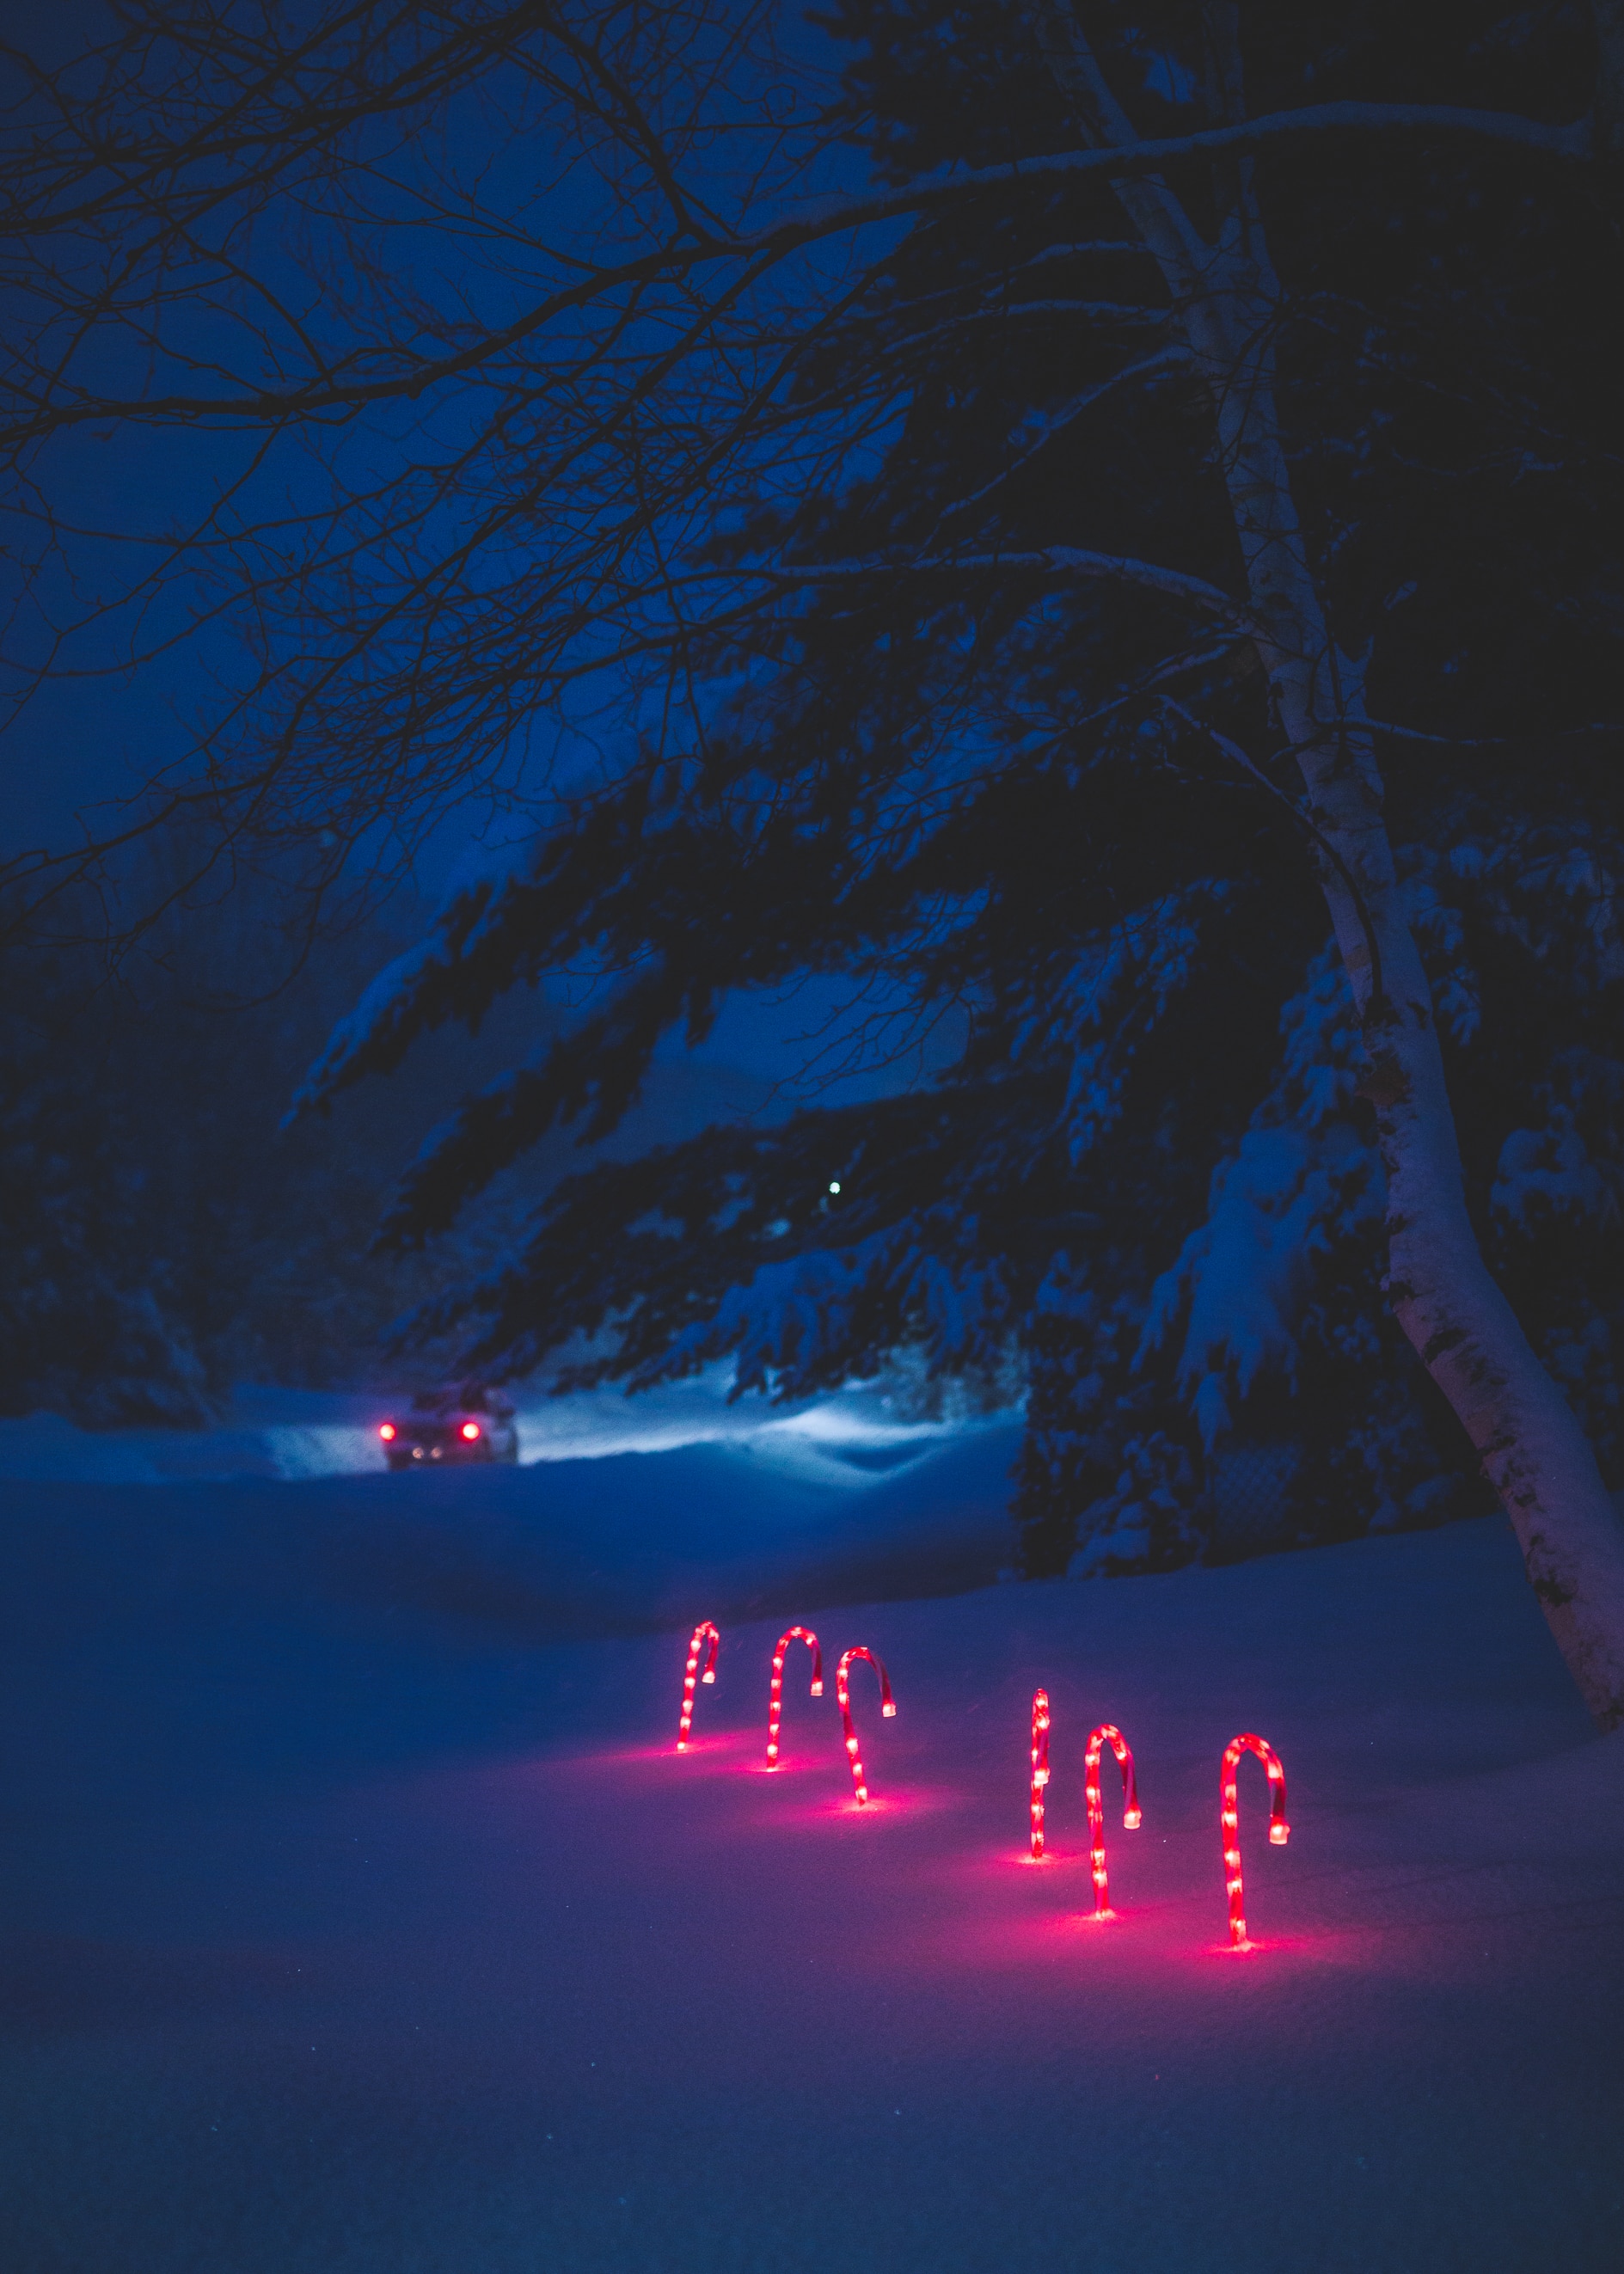 6 red lighted candy canes in snow near car at nighttime